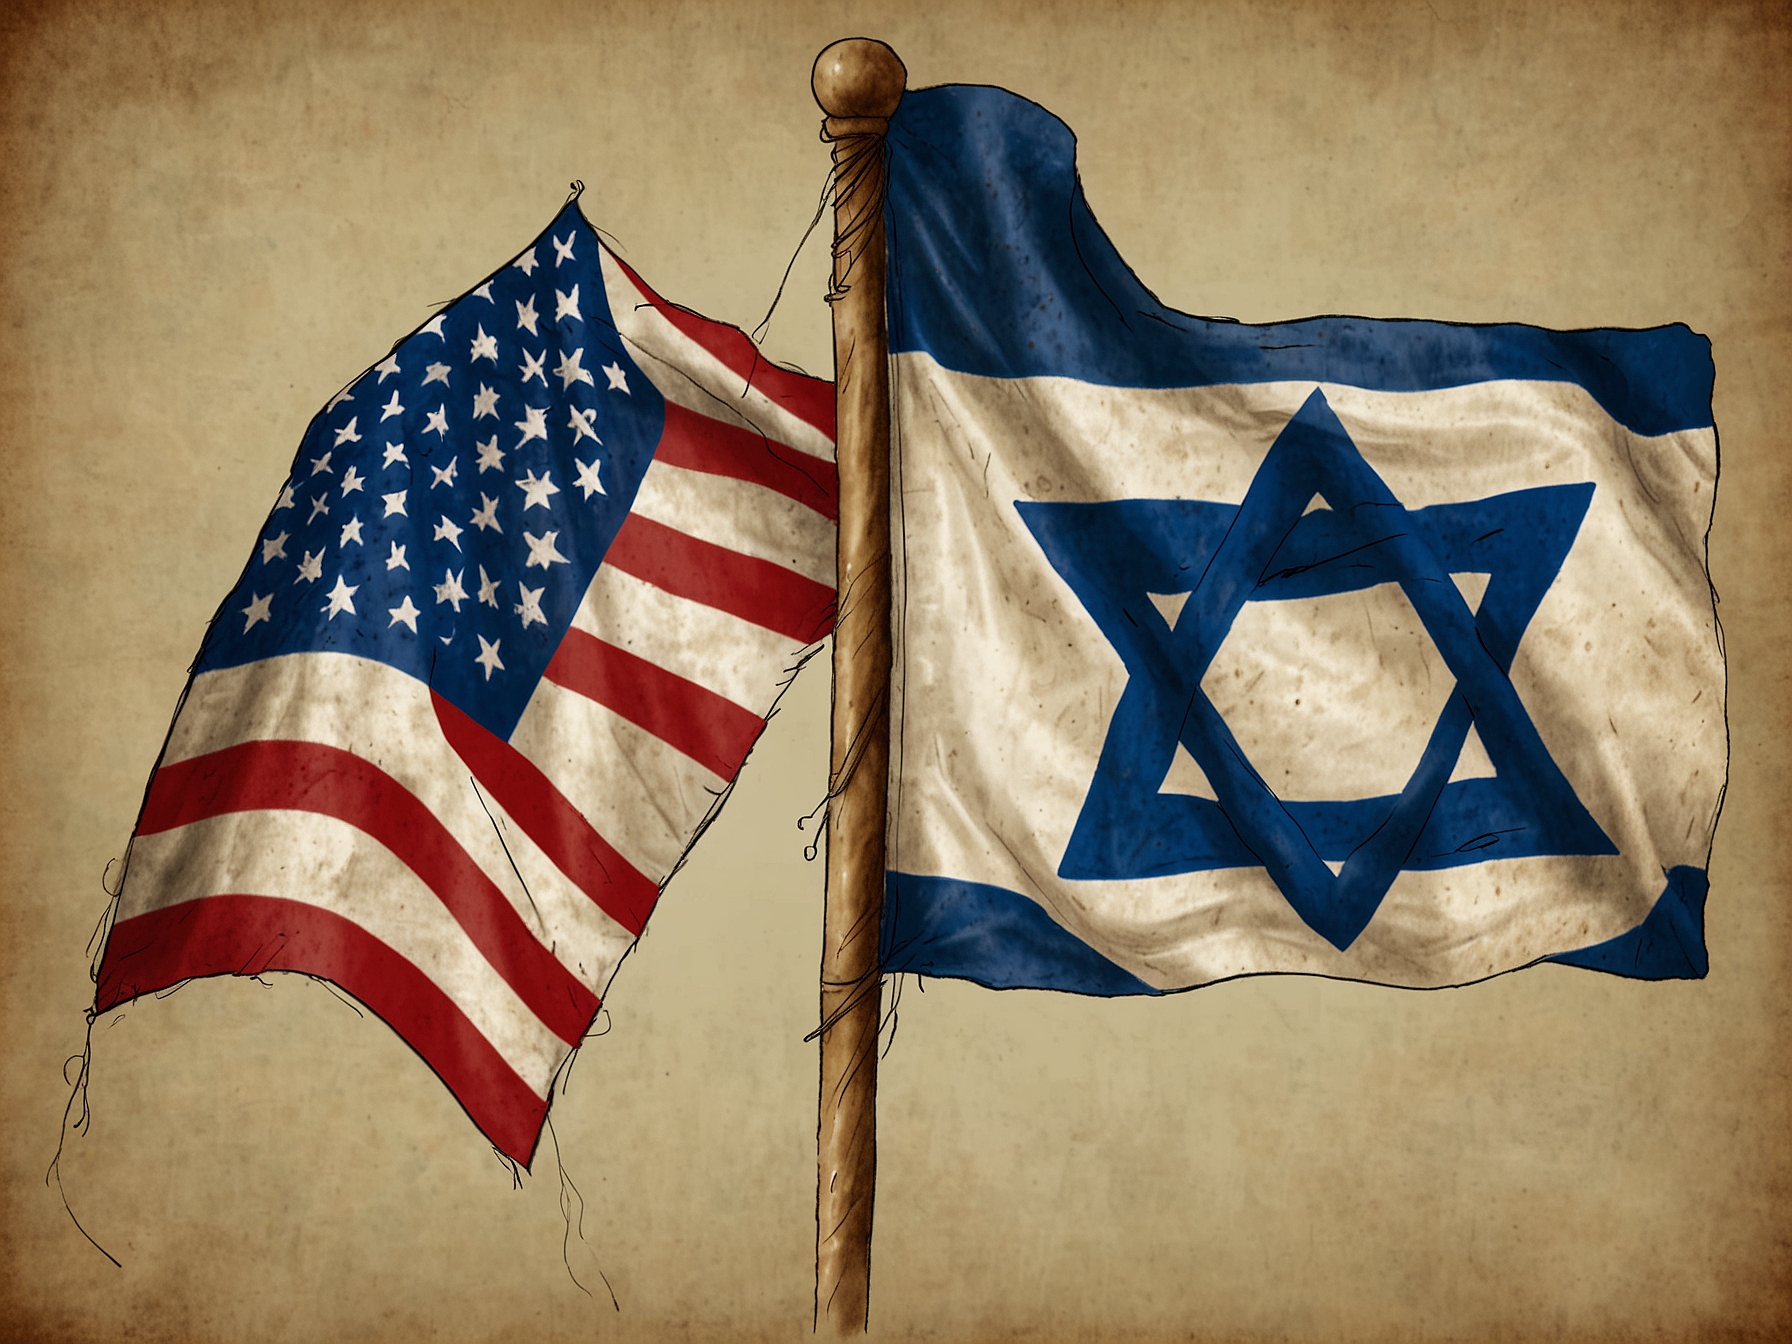 An illustration depicting U.S. and Israeli flags intertwined, symbolizing the historical bond. This graphic emphasizes the longstanding alliance and mutual support between the two nations.